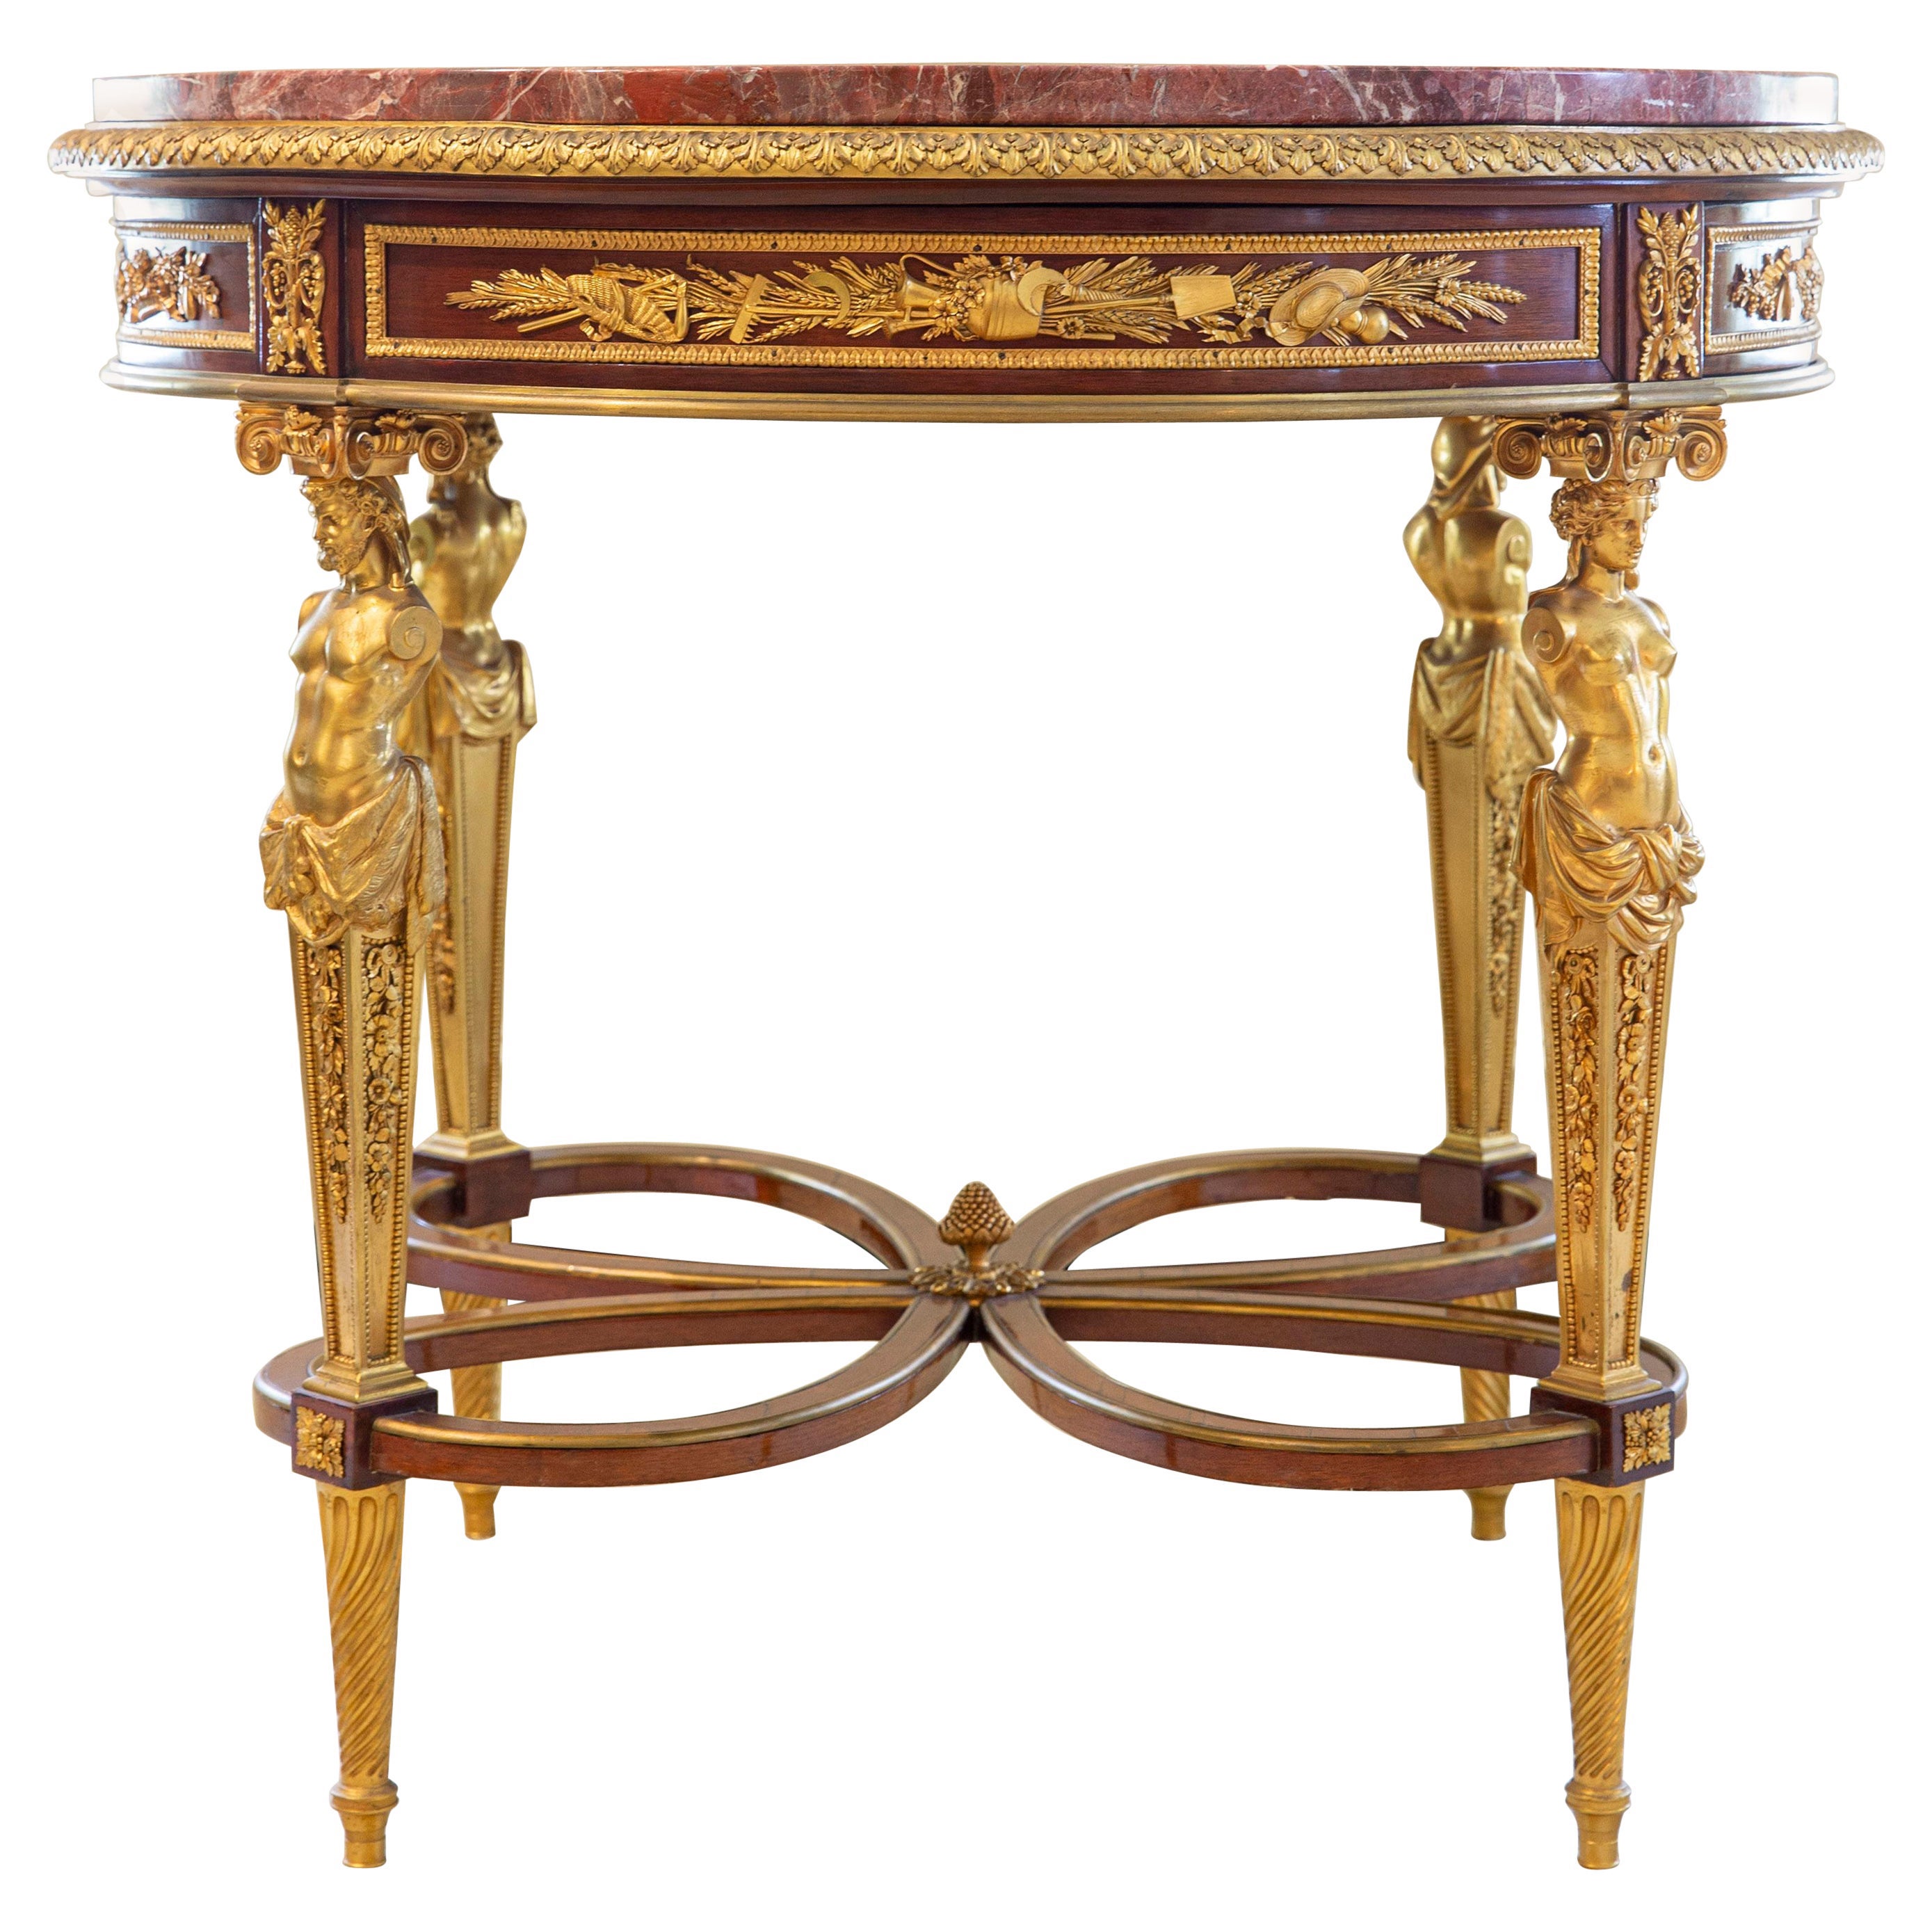 A Very Fine Late 19th Century Gilt Bronze Mounted Center Table by Henry Dasson